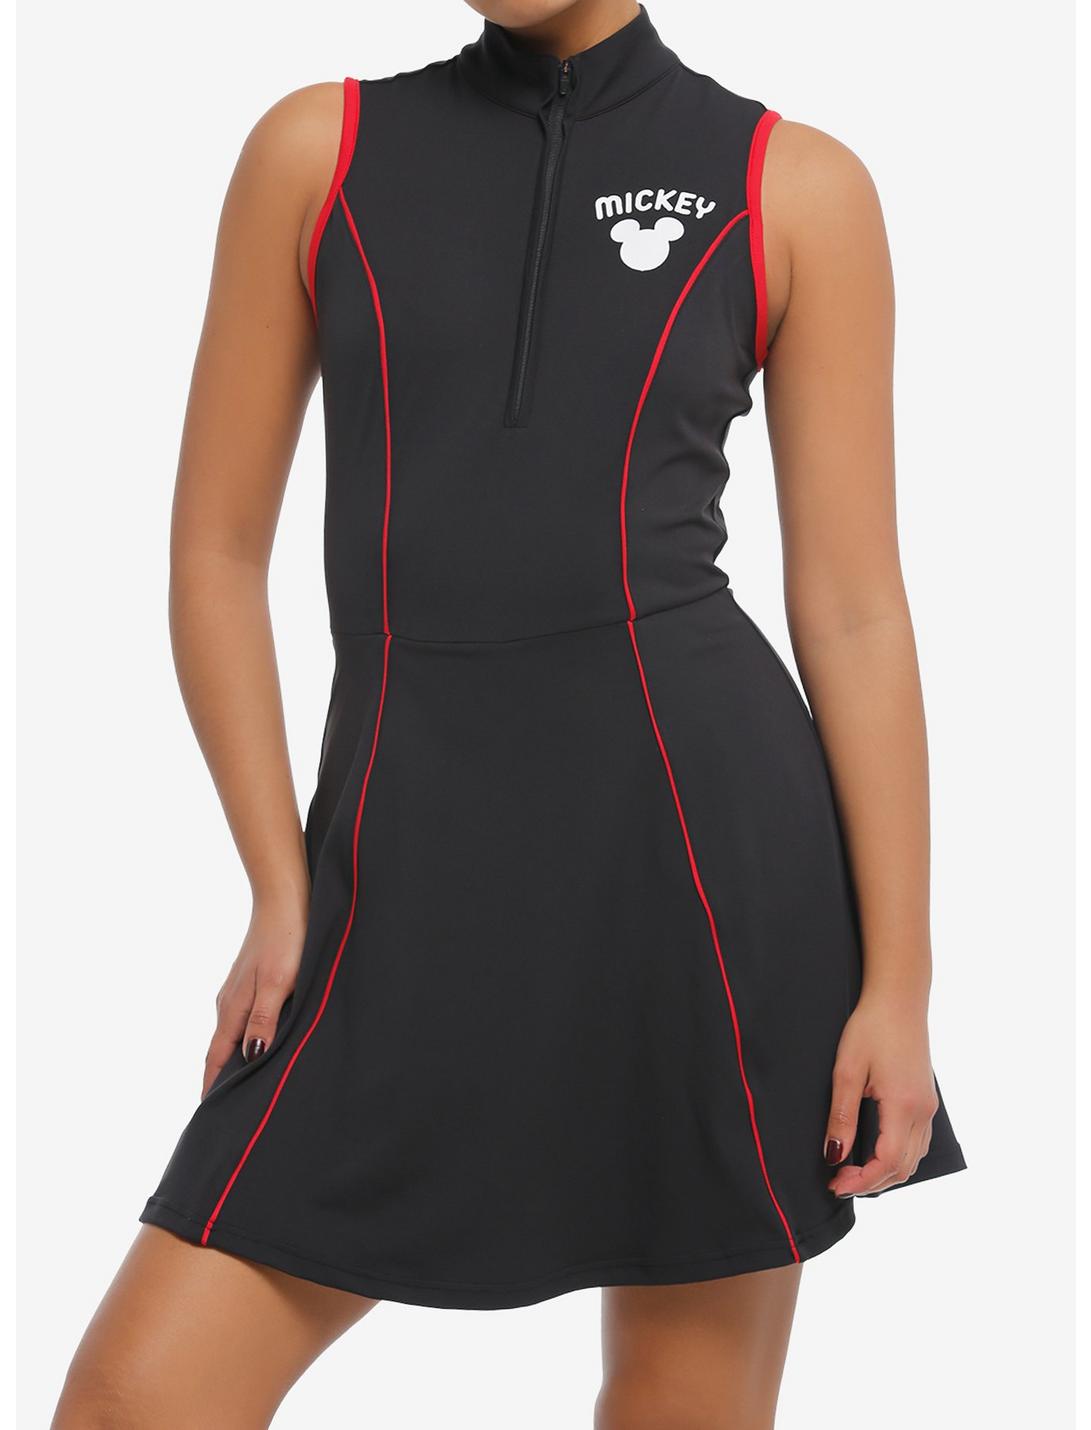 Her Universe Disney Mickey Mouse Athletic Dress Her Universe Exclusive, BLACK, hi-res